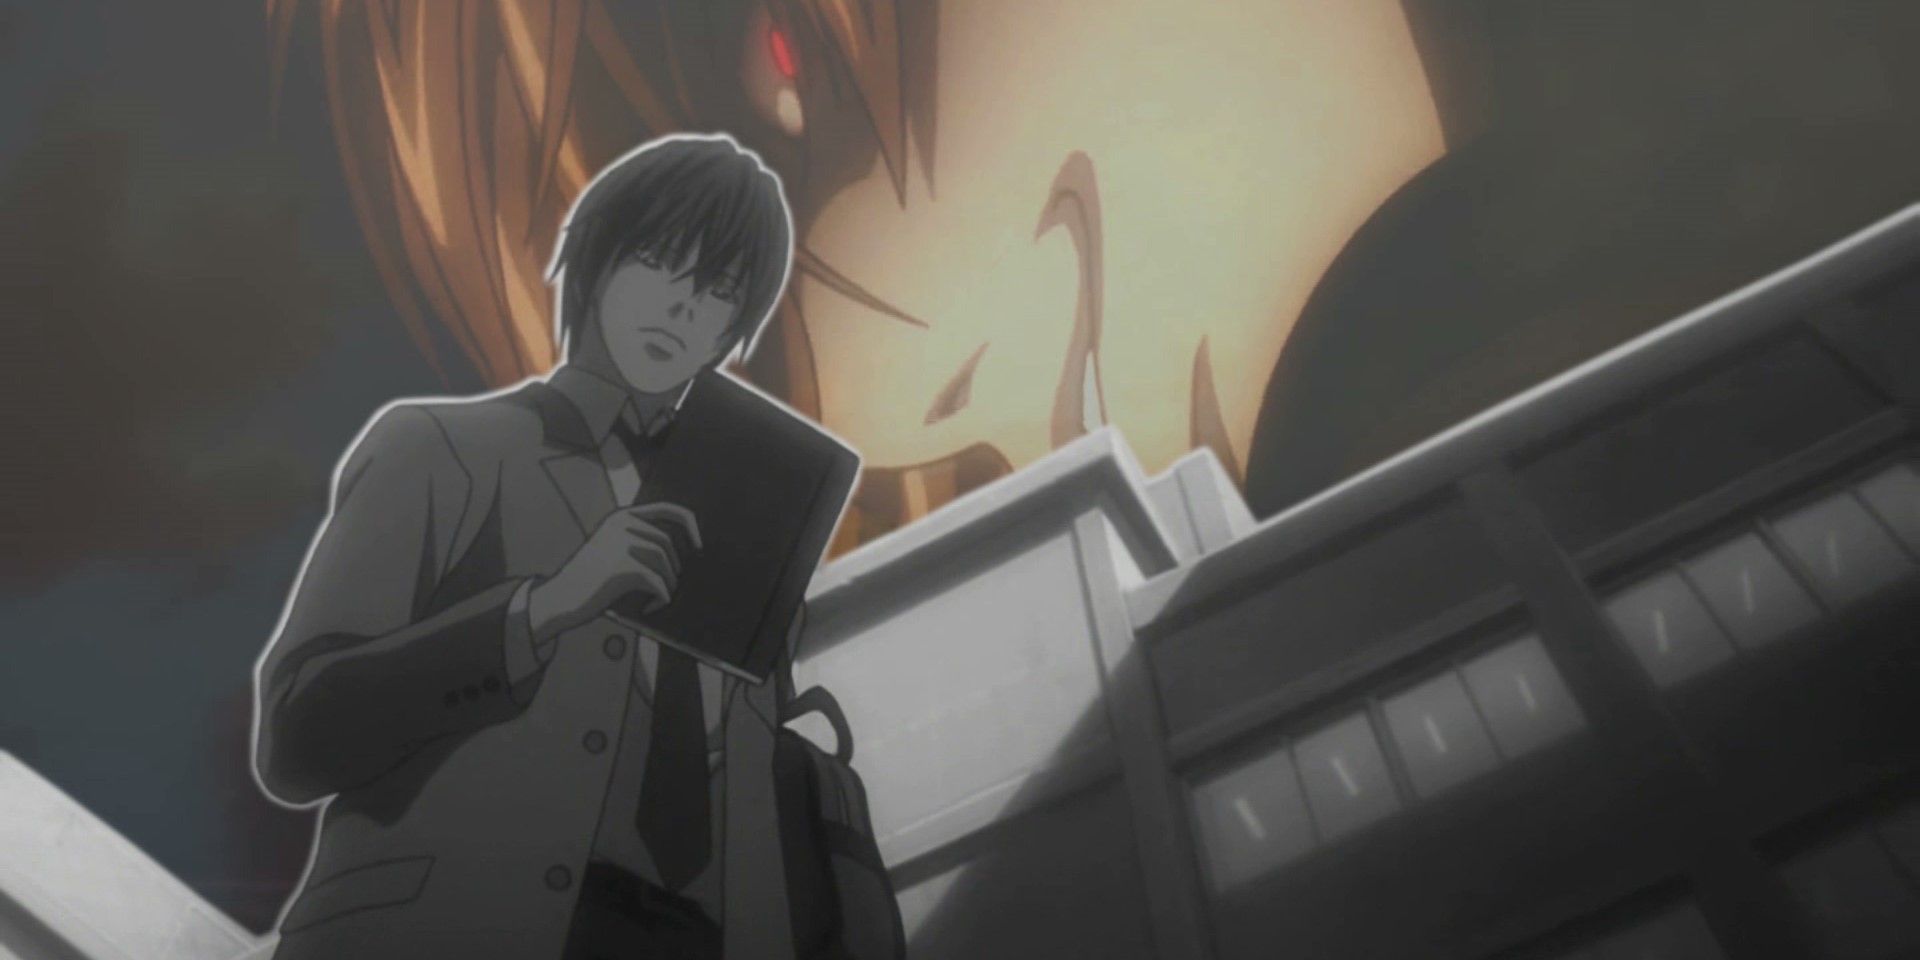 Light Yagami from Death Note.